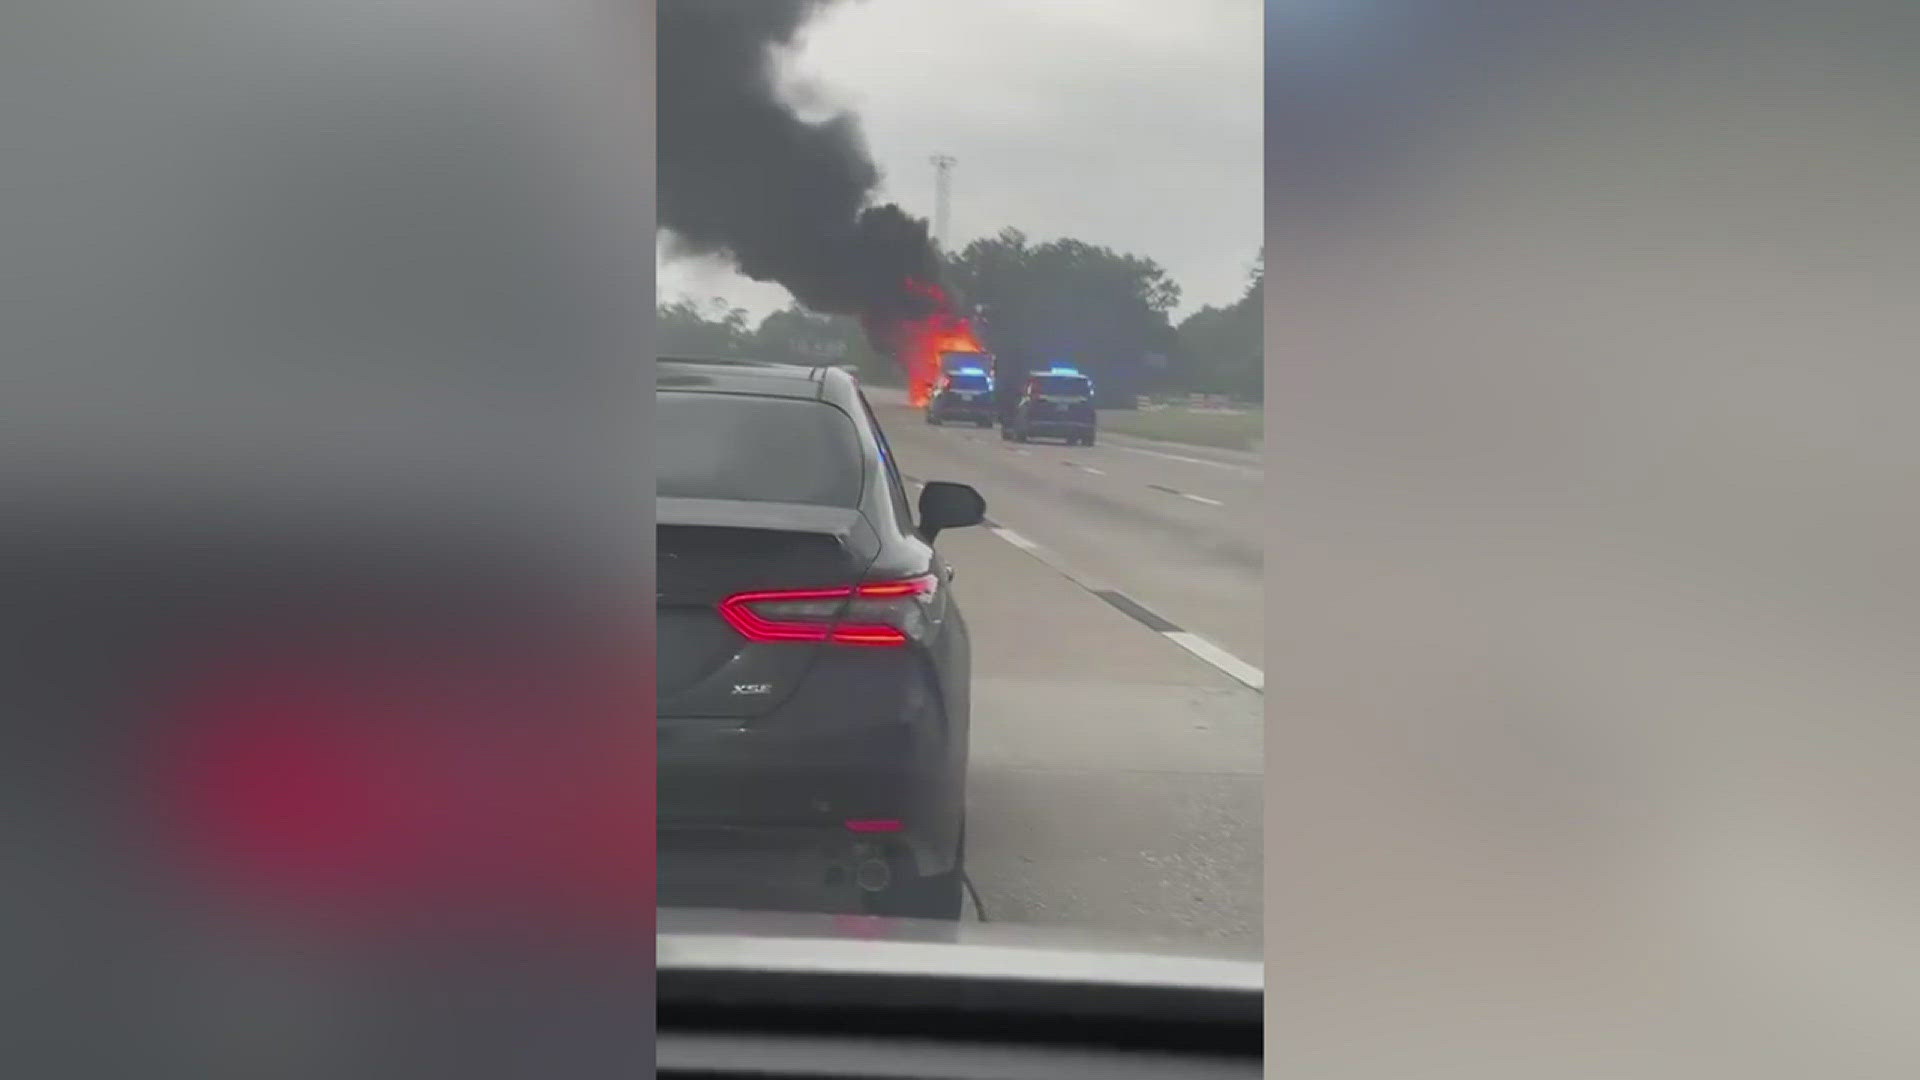 The driver of the truck made it out safely before it was engulfed in flames